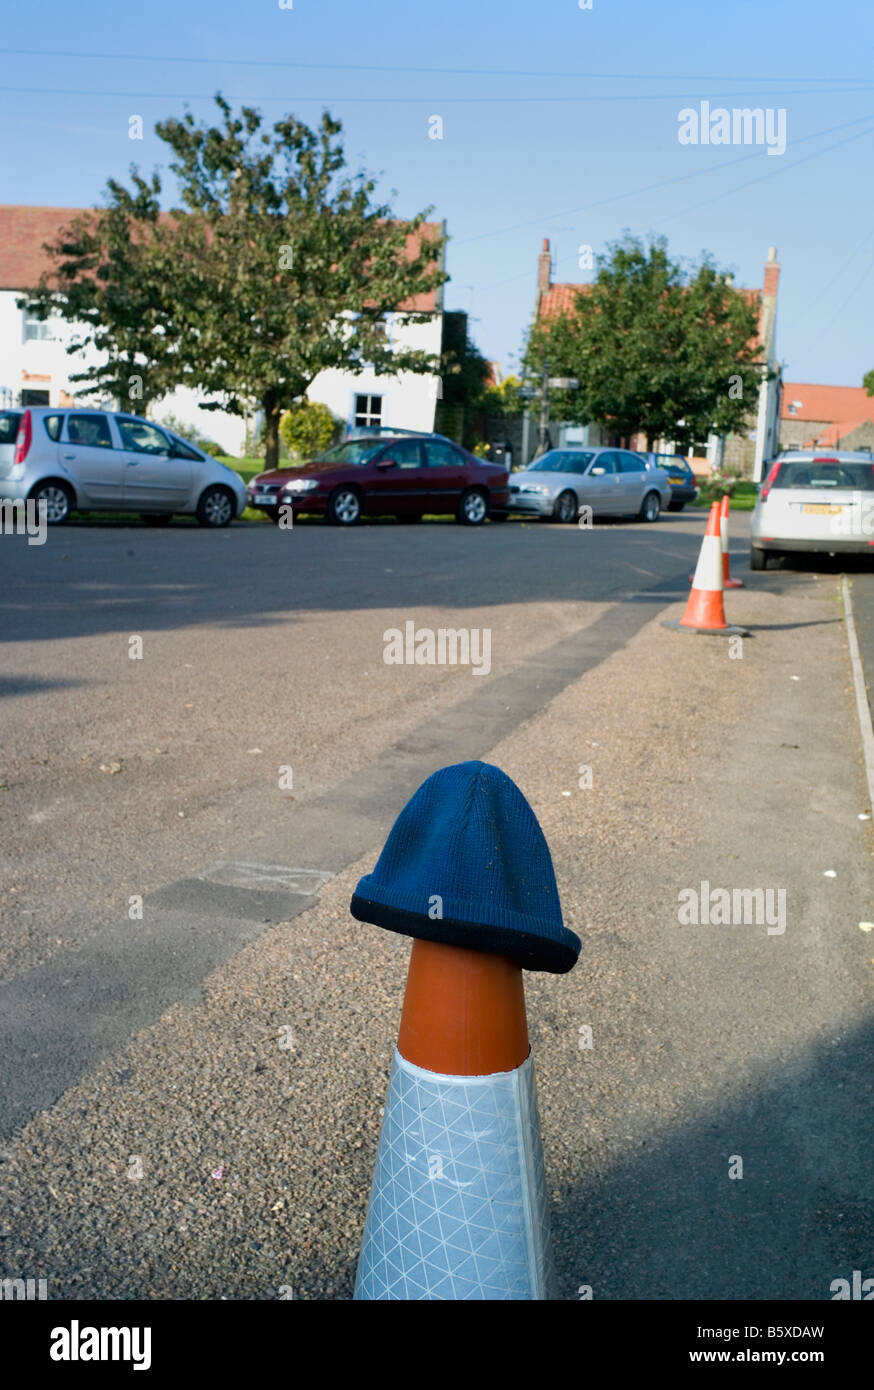 Lost woolly hat on a traffic cone Stock Photo